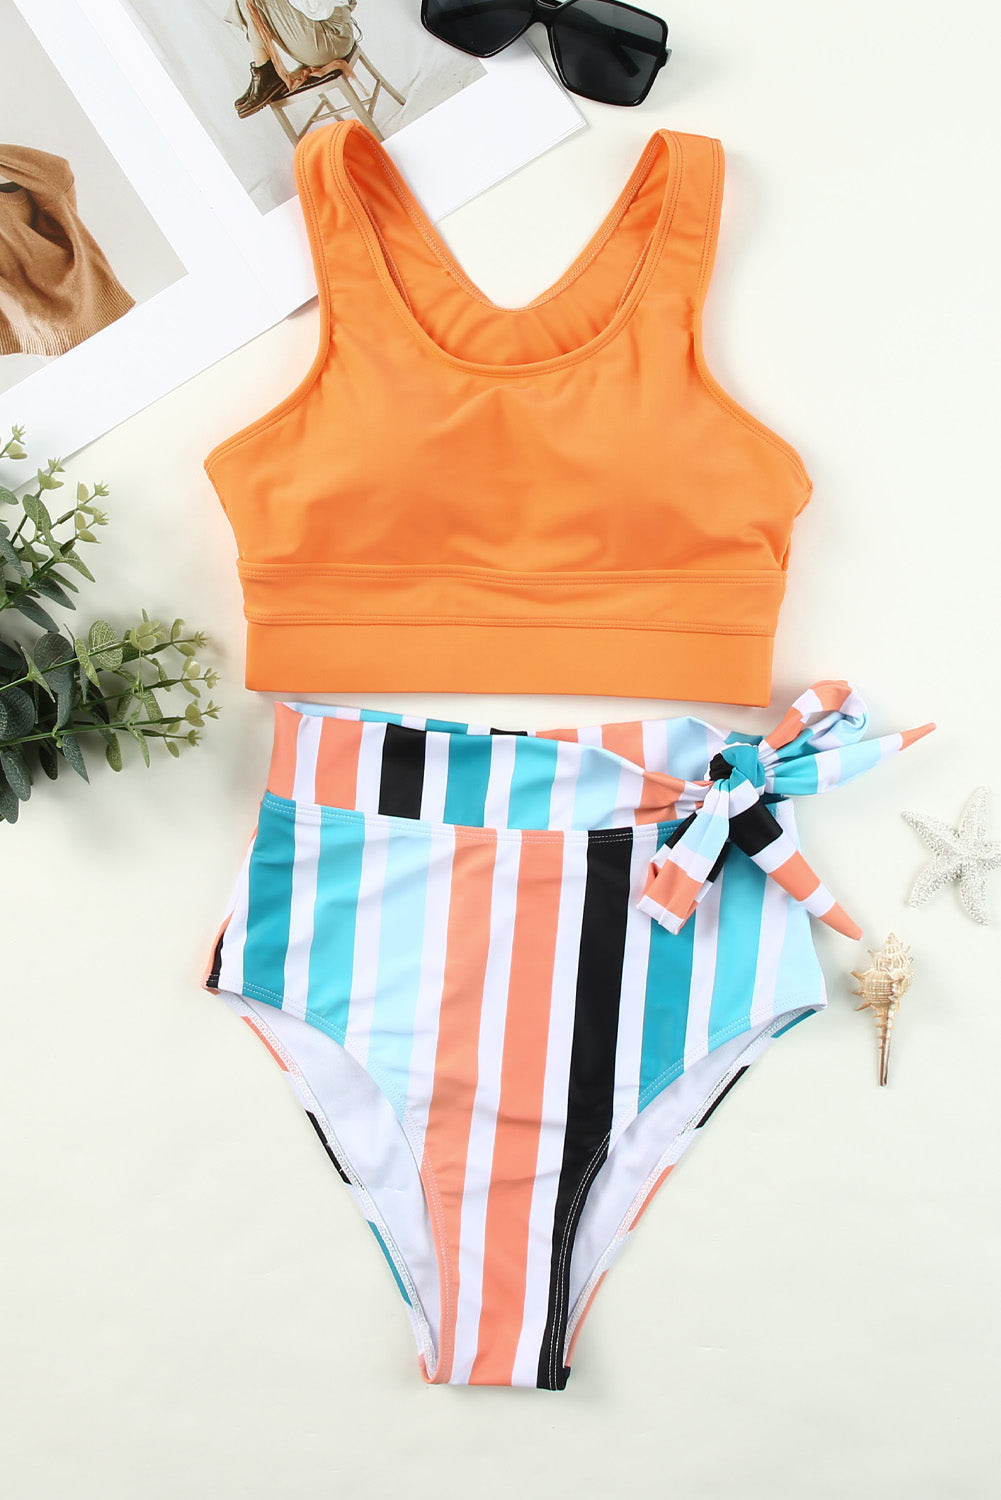 LC433055-1014-S, LC433055-1014-M, LC433055-1014-L, LC433055-1014-XL, Orange Floral Printed Lace Up Two Piece Swimsuit High Waisted Bottom Bikini Set